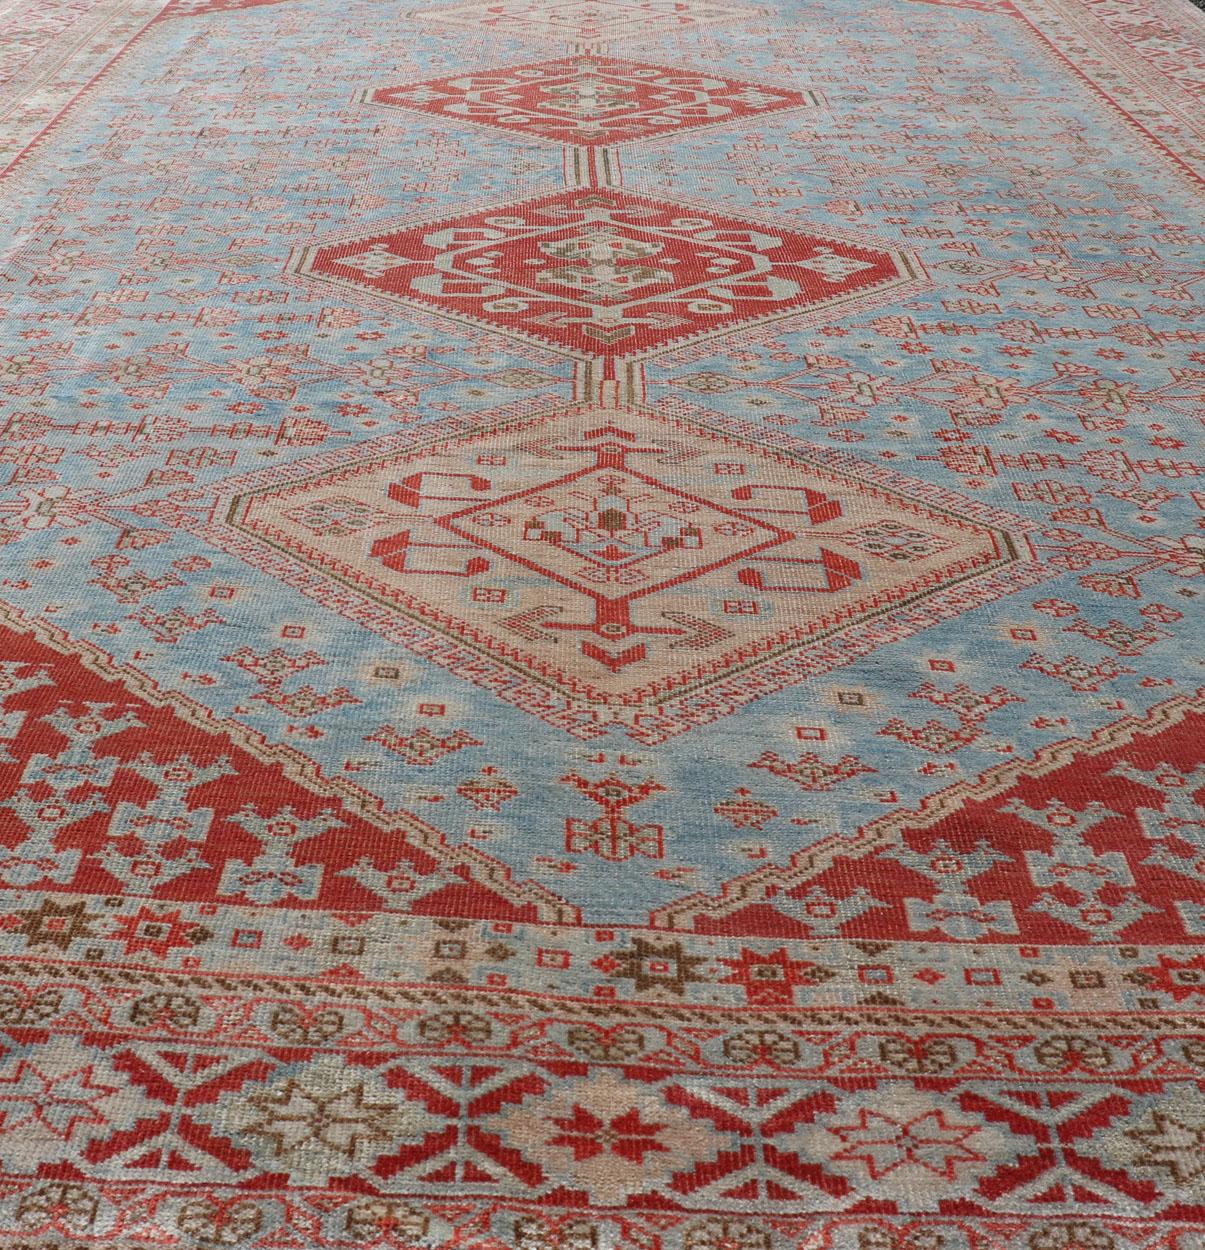 Antique Persian Qashqai Shiraz Tribal Rug with Latch Hooked Diamond Design For Sale 1